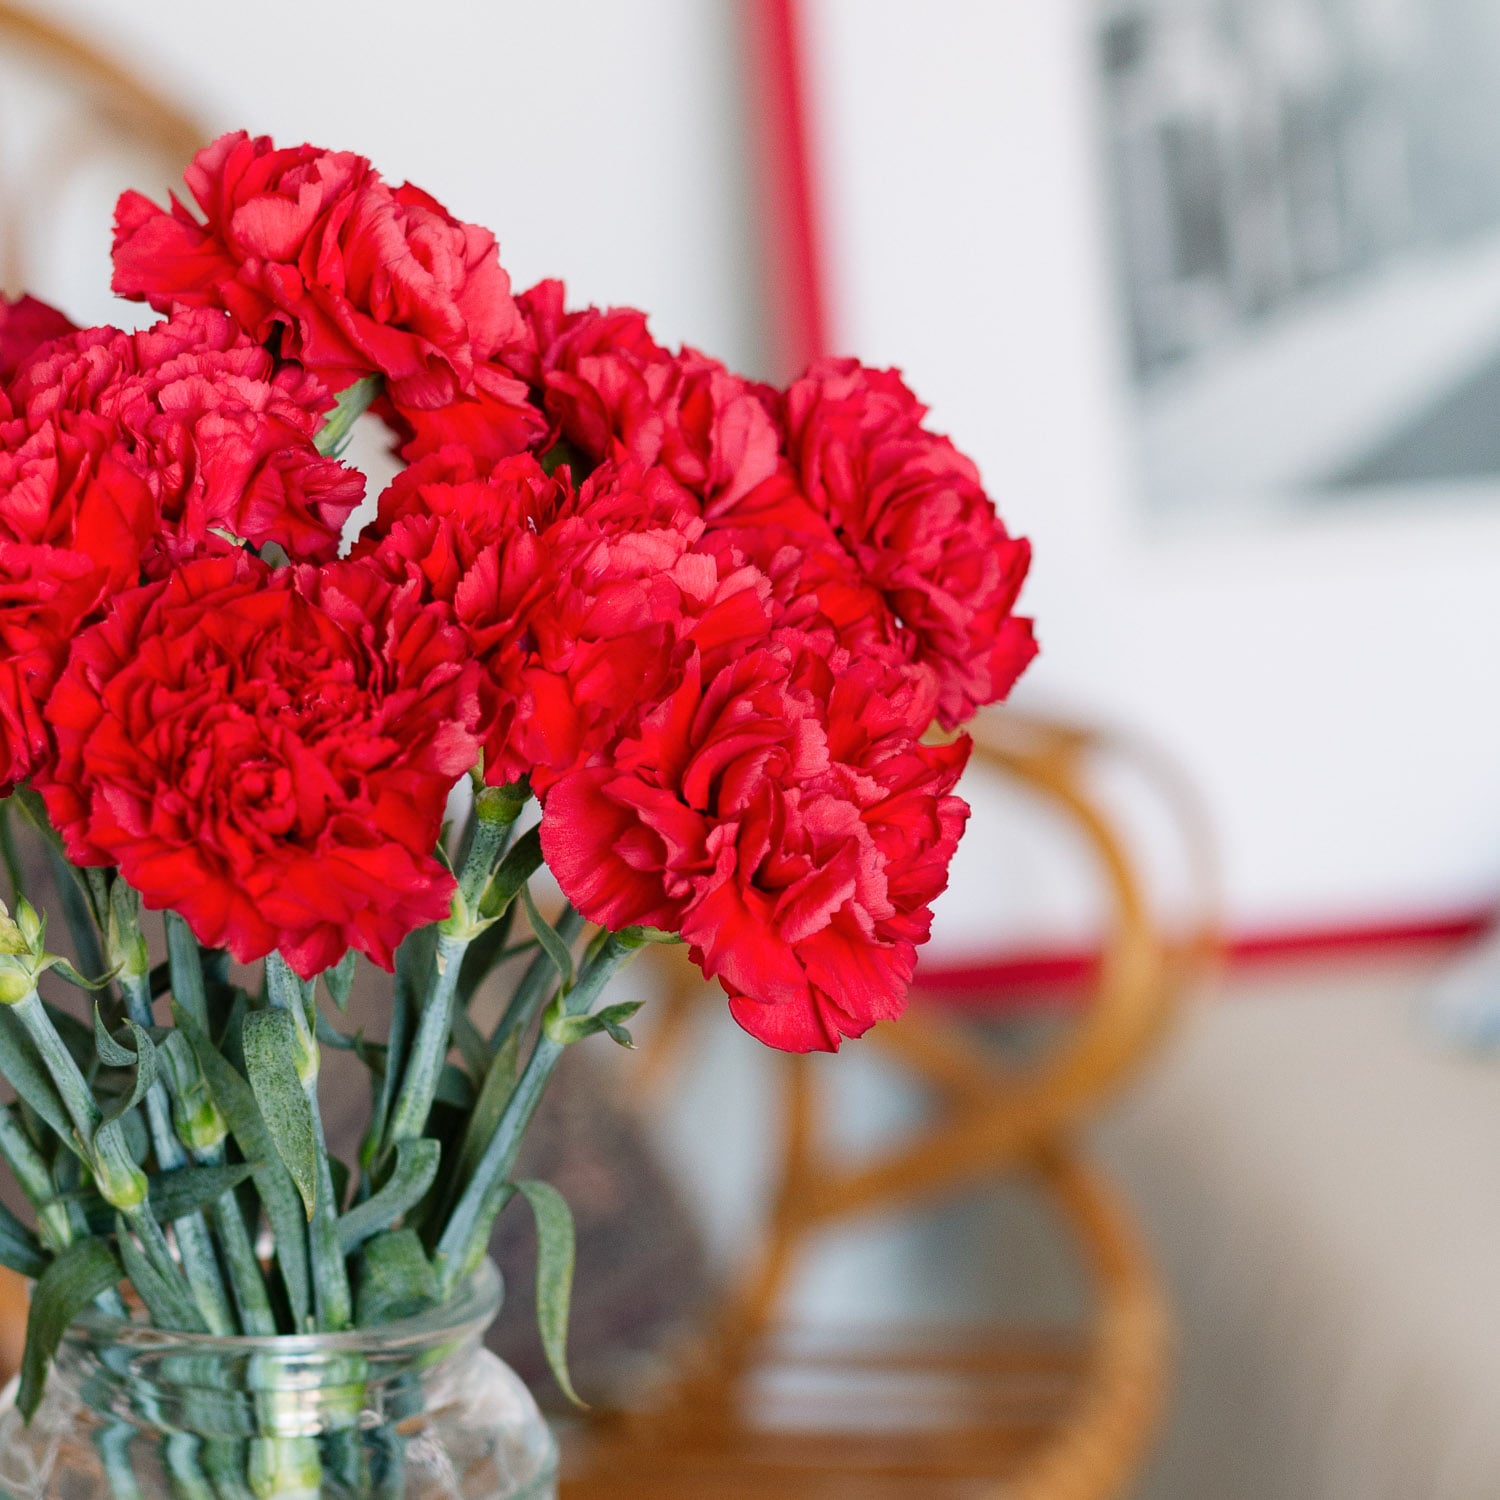 Red carnations